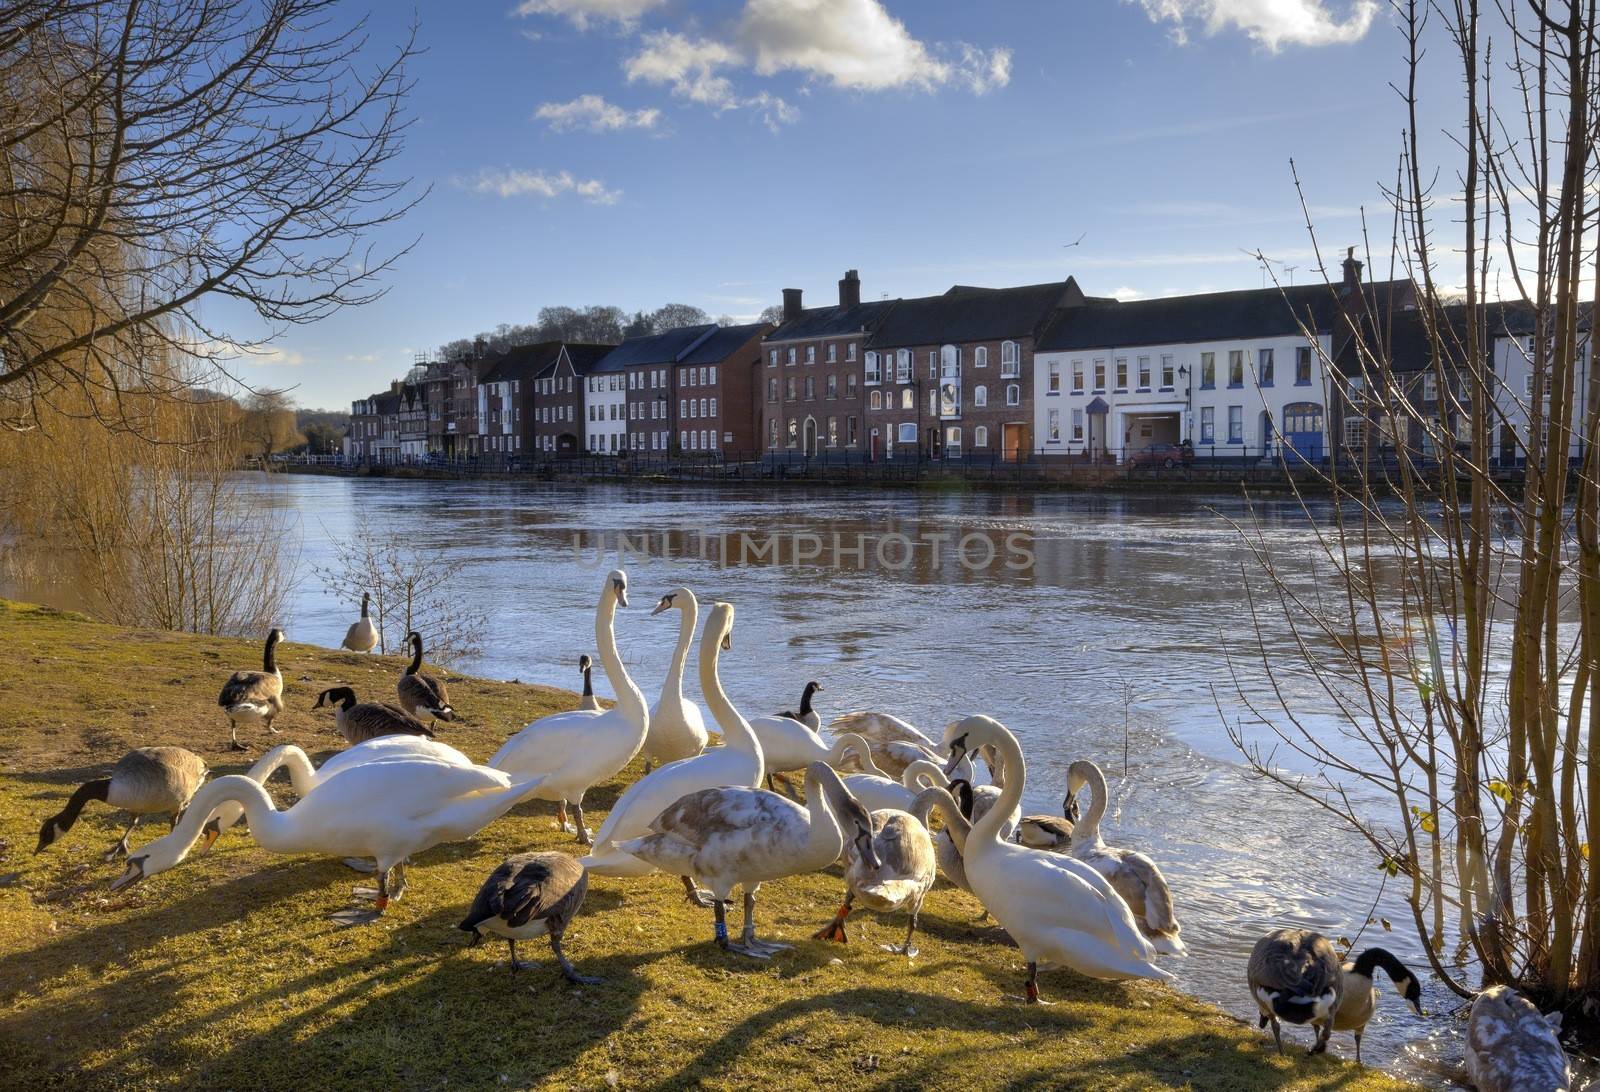 Swans and geese on the bank of the River Severn, Bewdley, Worcestershire, England.